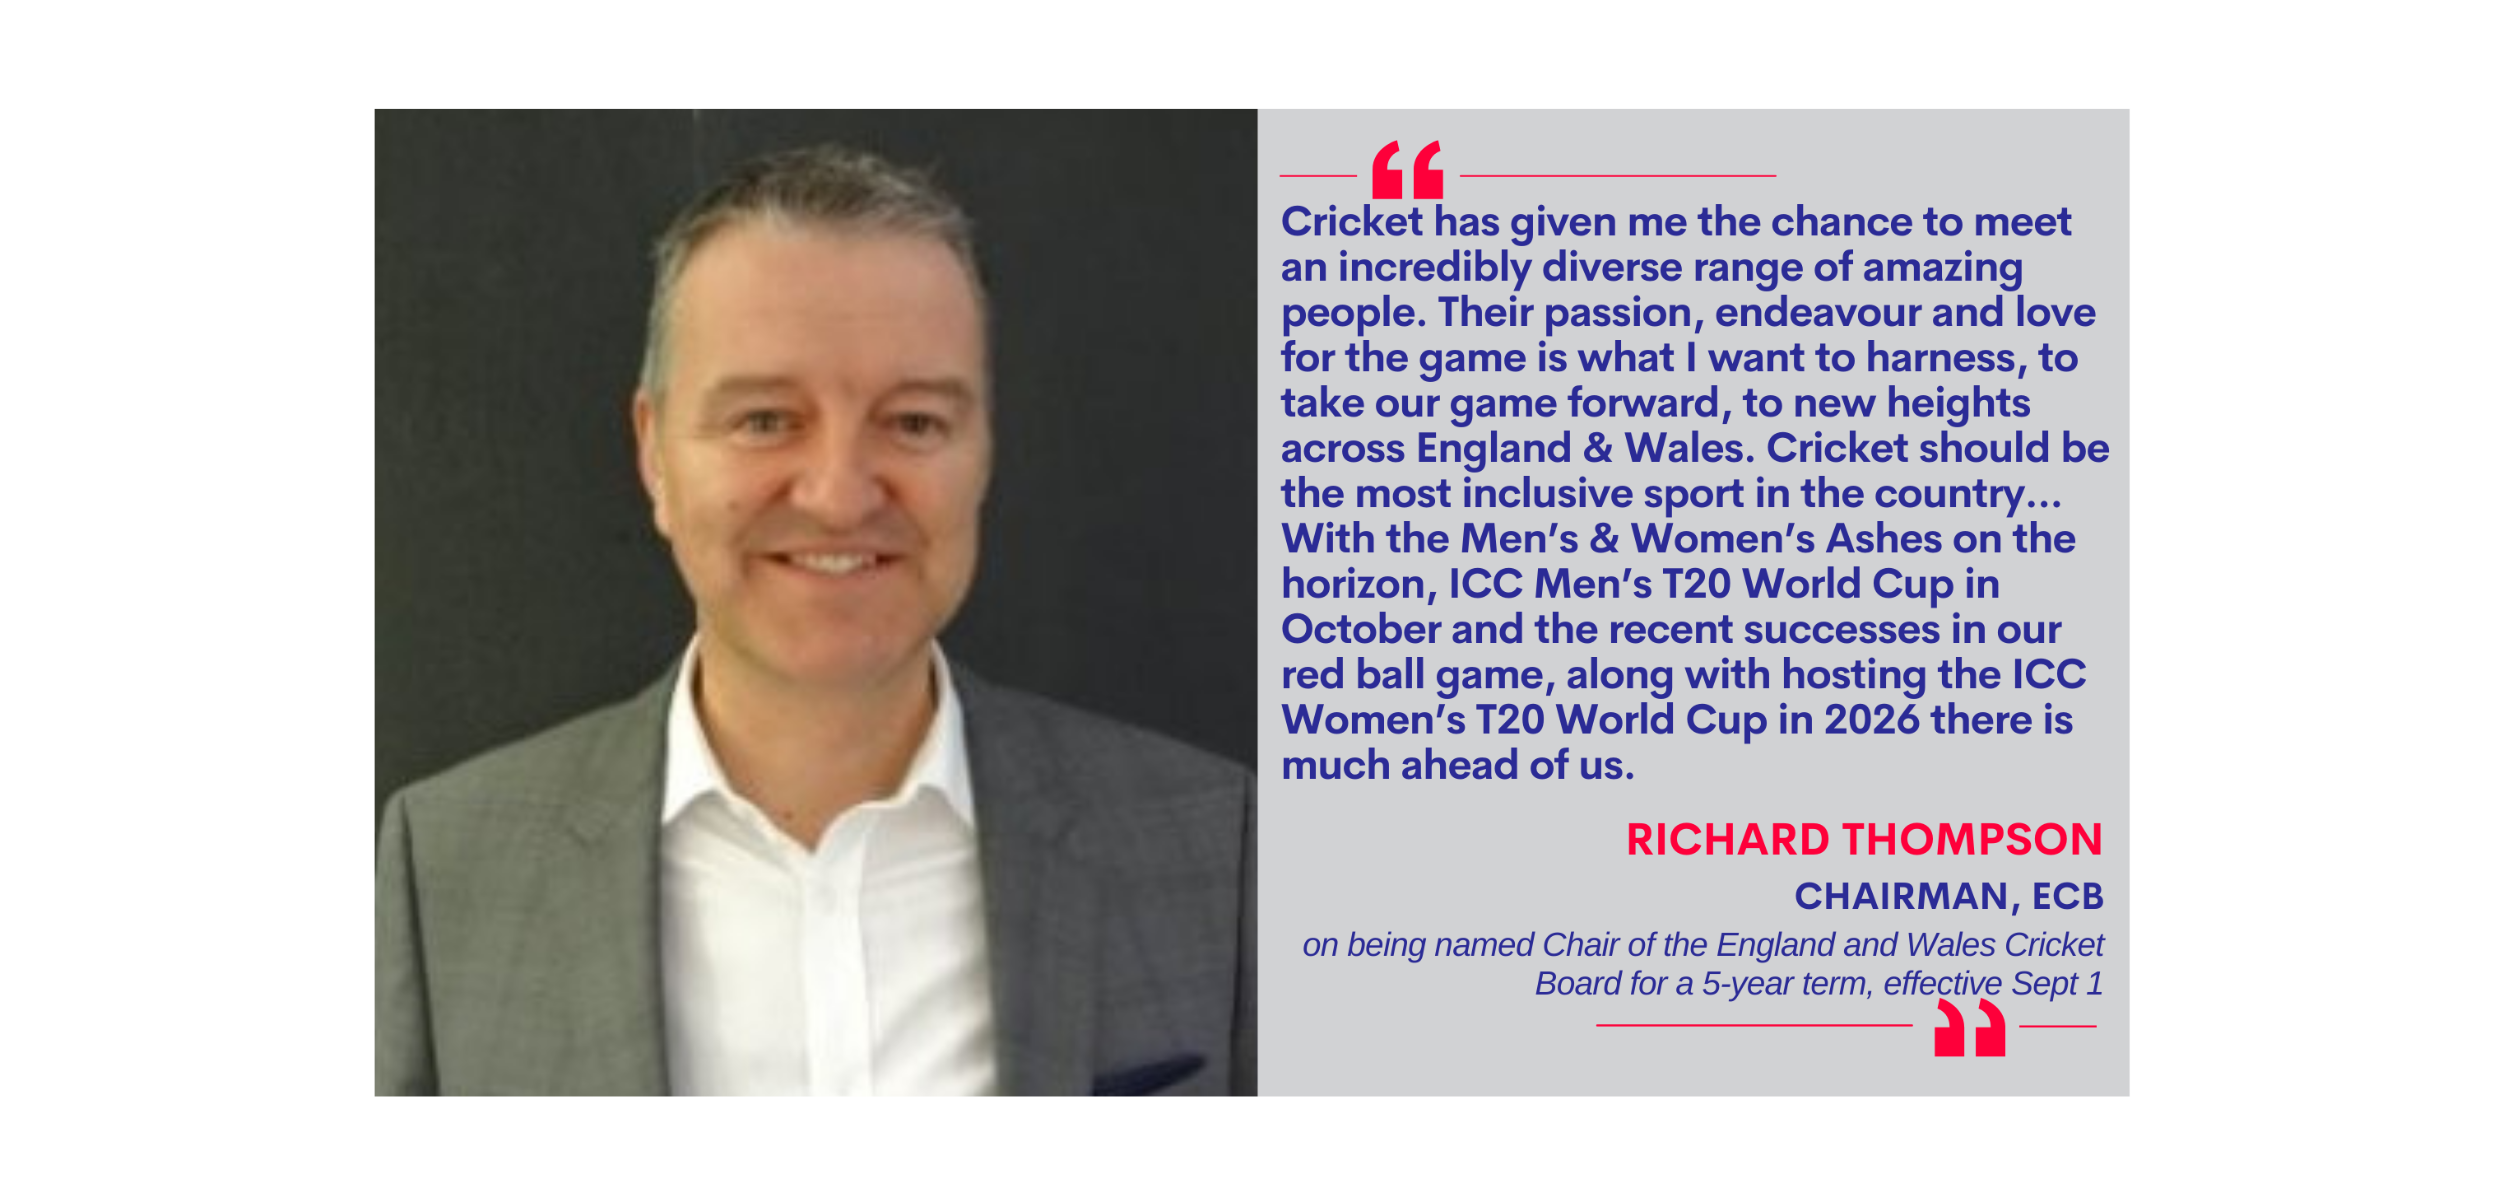 Richard Thompson, Chairman, ECB on being named as Chair of the England and Wales Cricket Board on a 5-year term, effective Sept 1